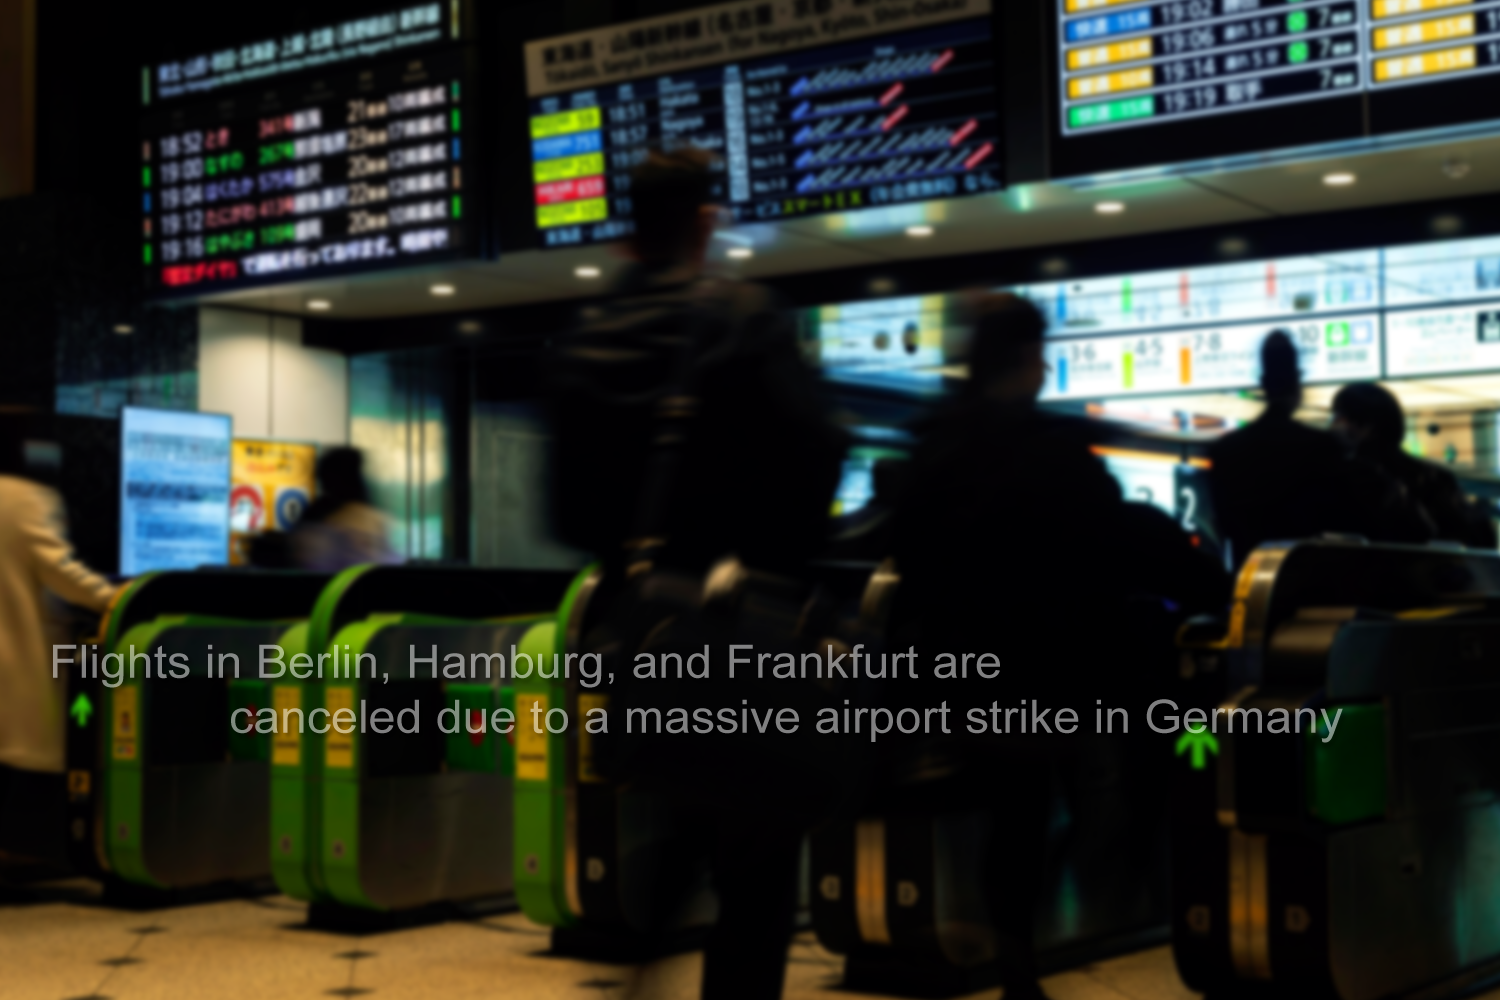 Flights in Berlin, Hamburg, and Frankfurt are canceled due to a massive airport strike in Germany.